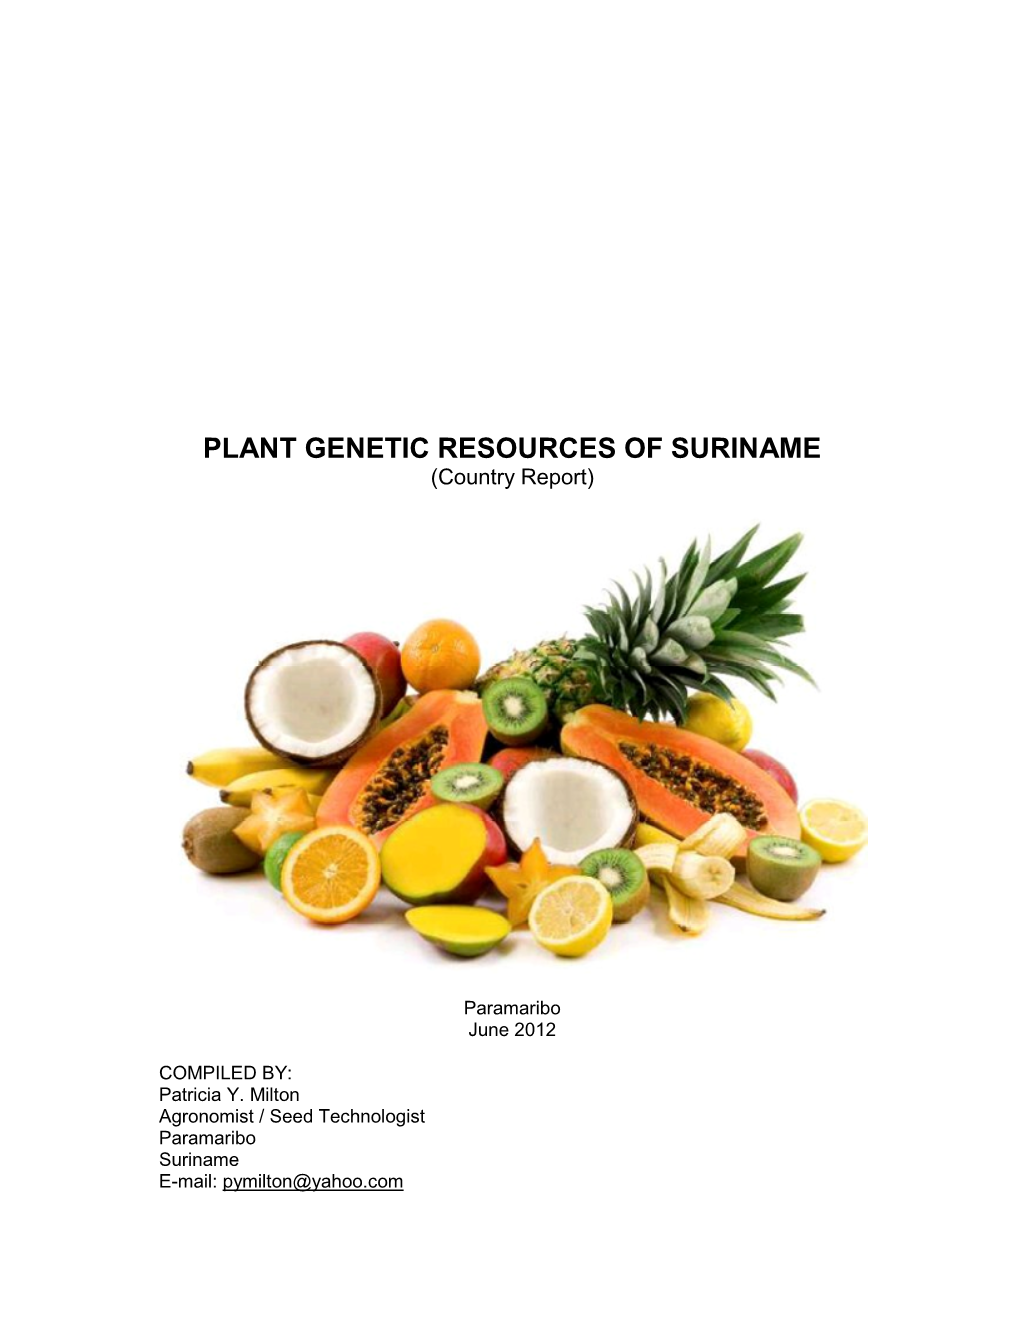 PLANT GENETIC RESOURCES of SURINAME (Country Report)